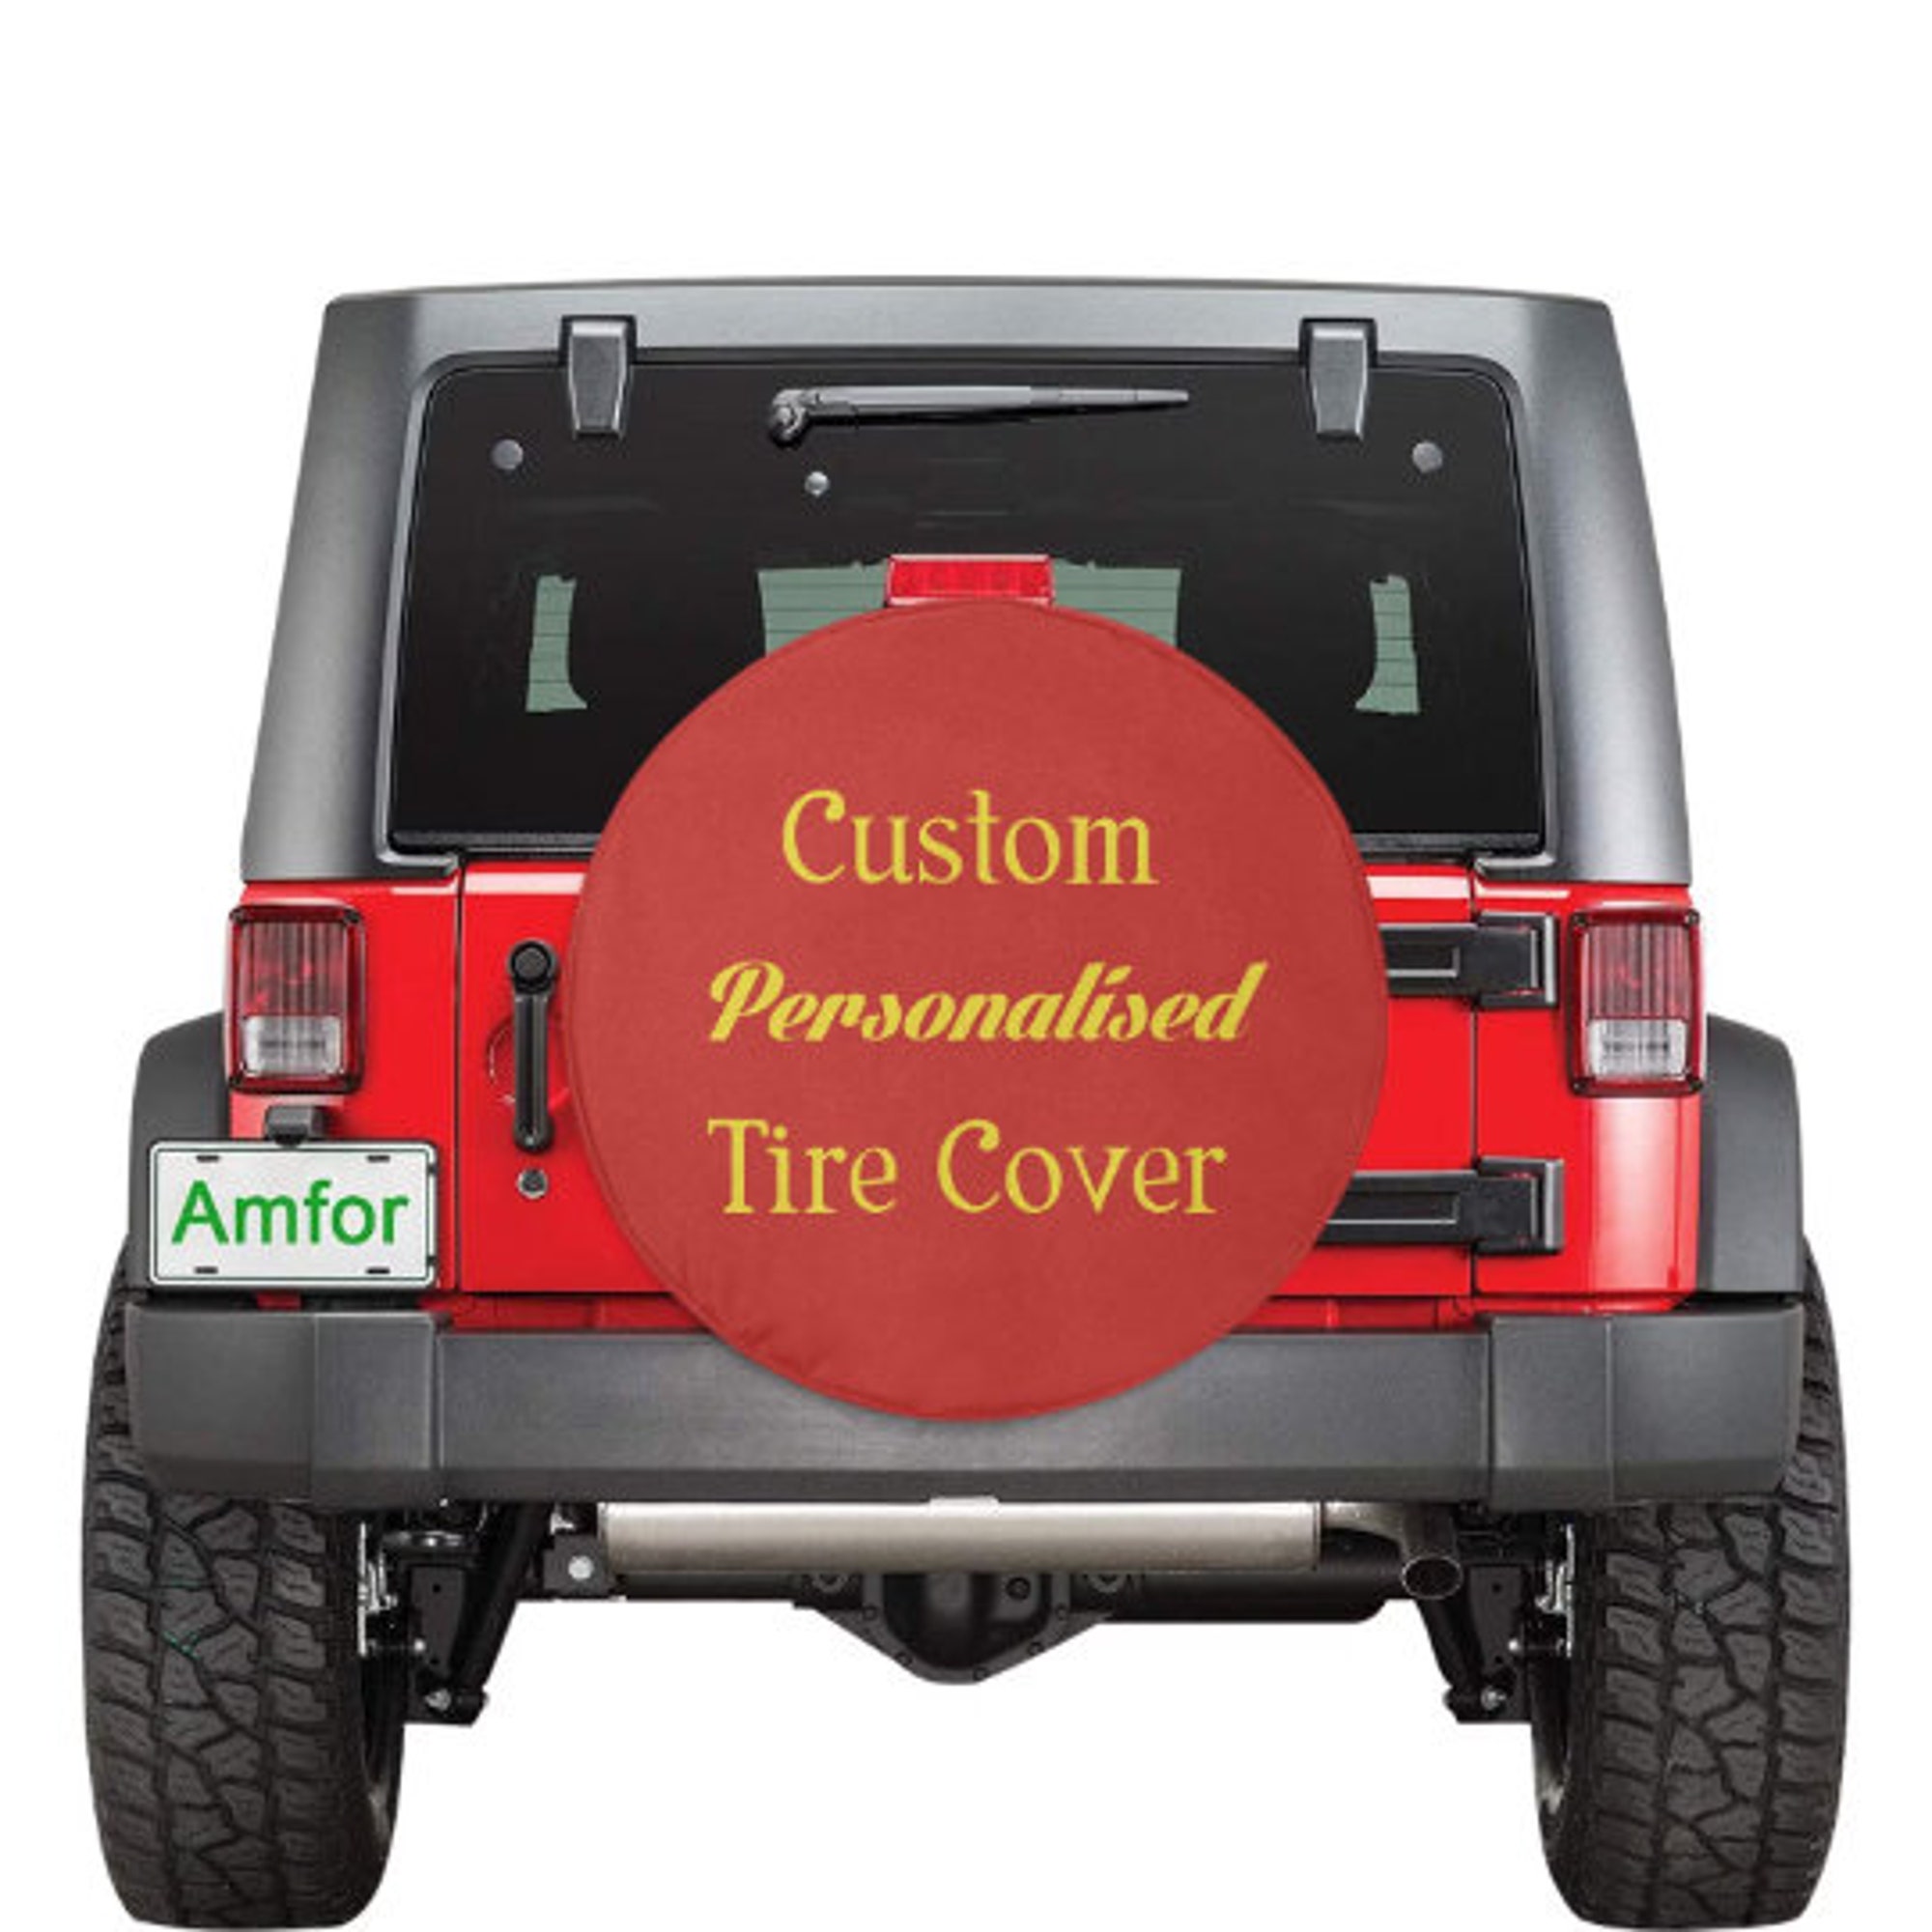 Personalised Spare Tire Cover